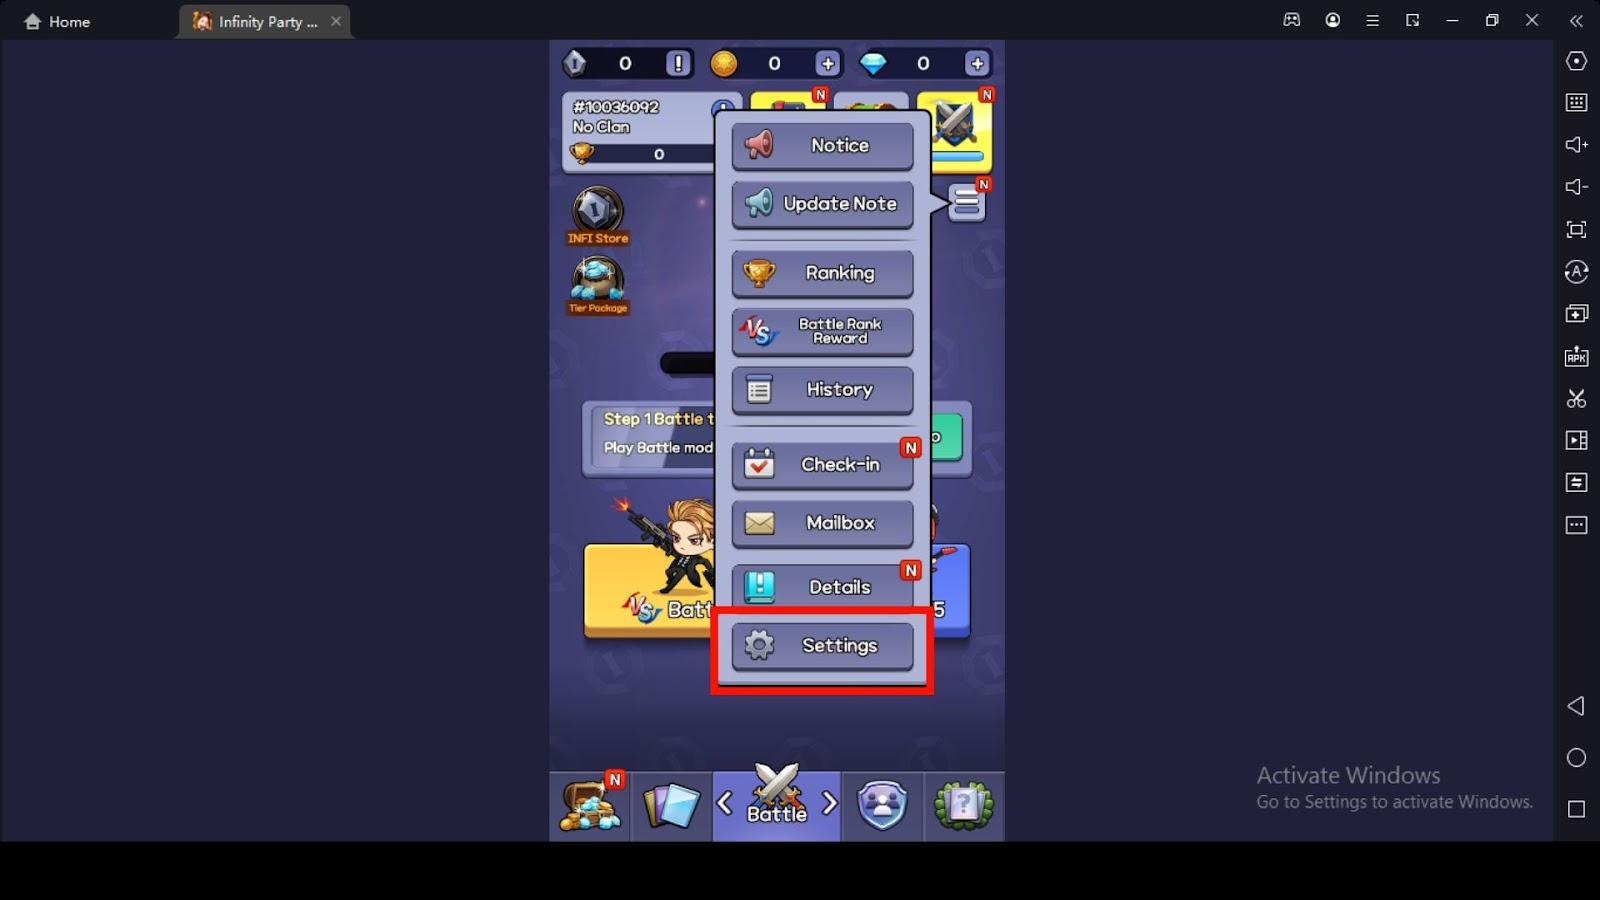 How to Redeem Infinity Party Battle Codes